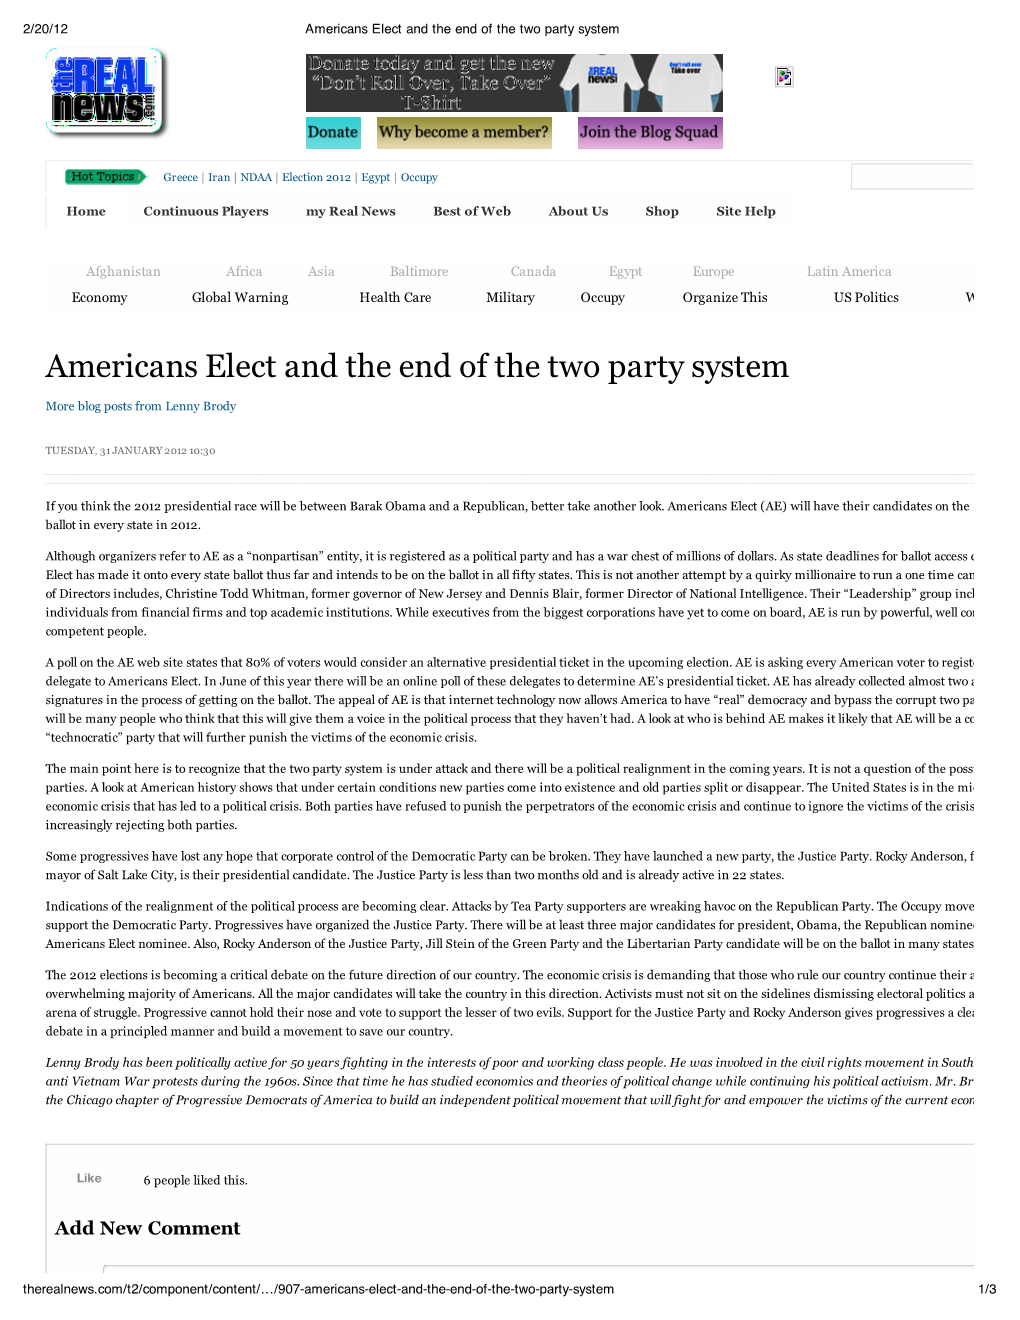 Americans Elect and the End of the Two Party System